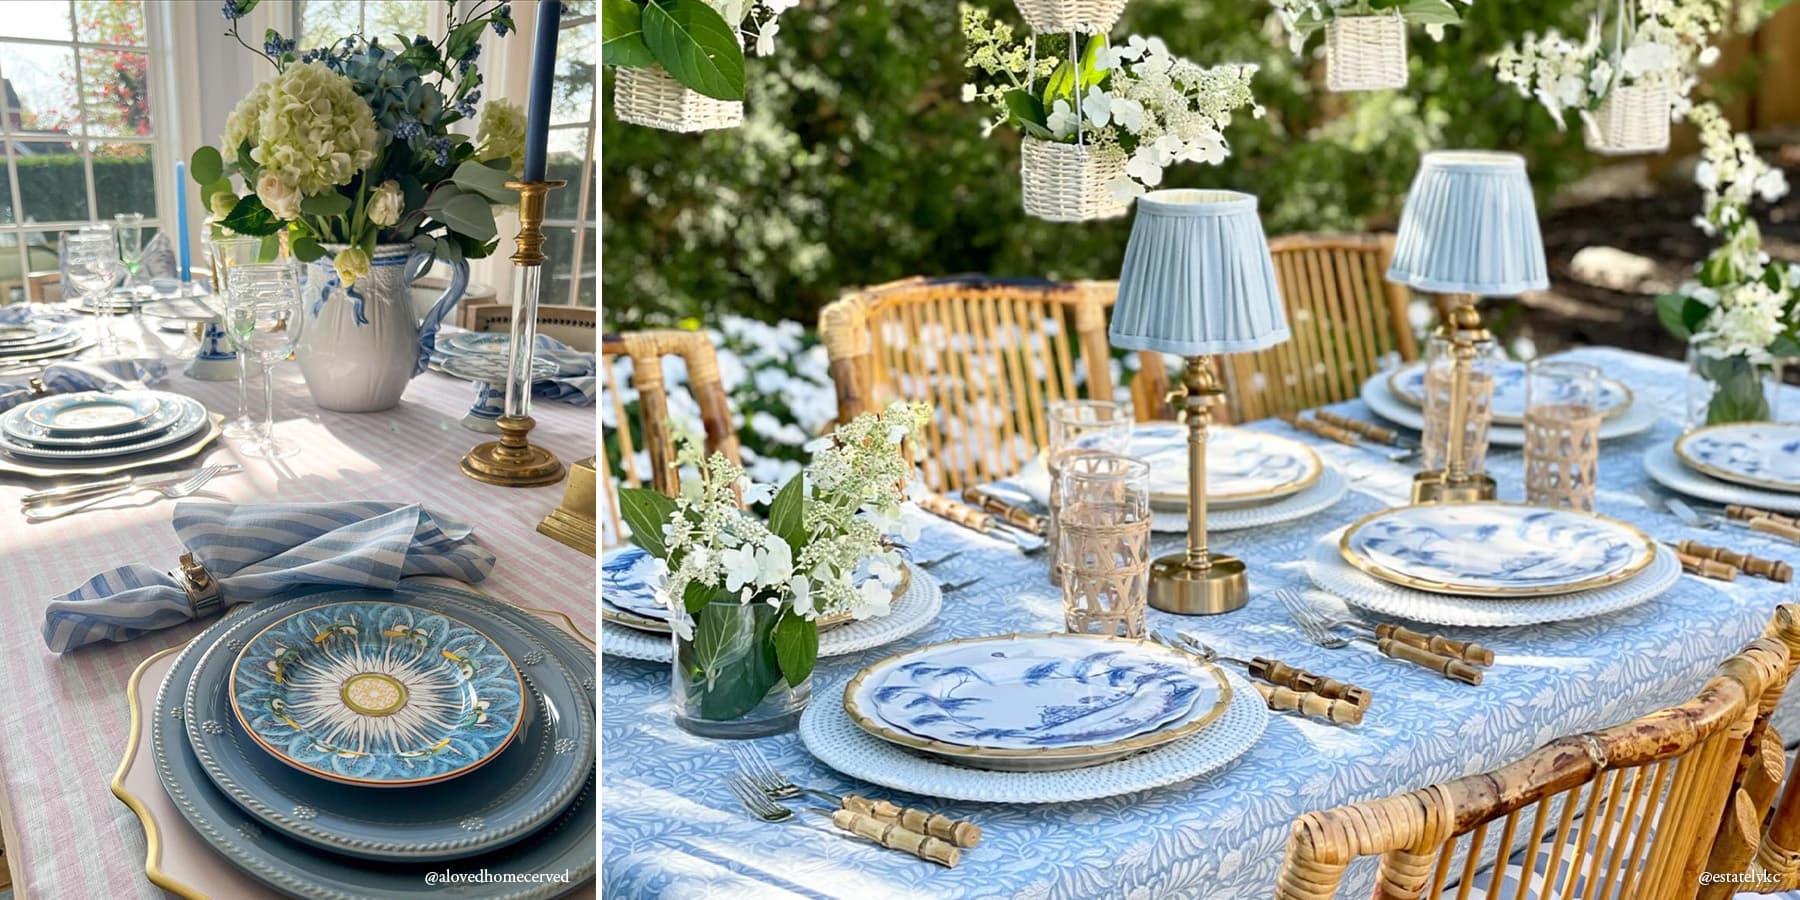 Classic blue and white is on display in two ways—formal and casual—illustrating why this color combination is just so versatile.